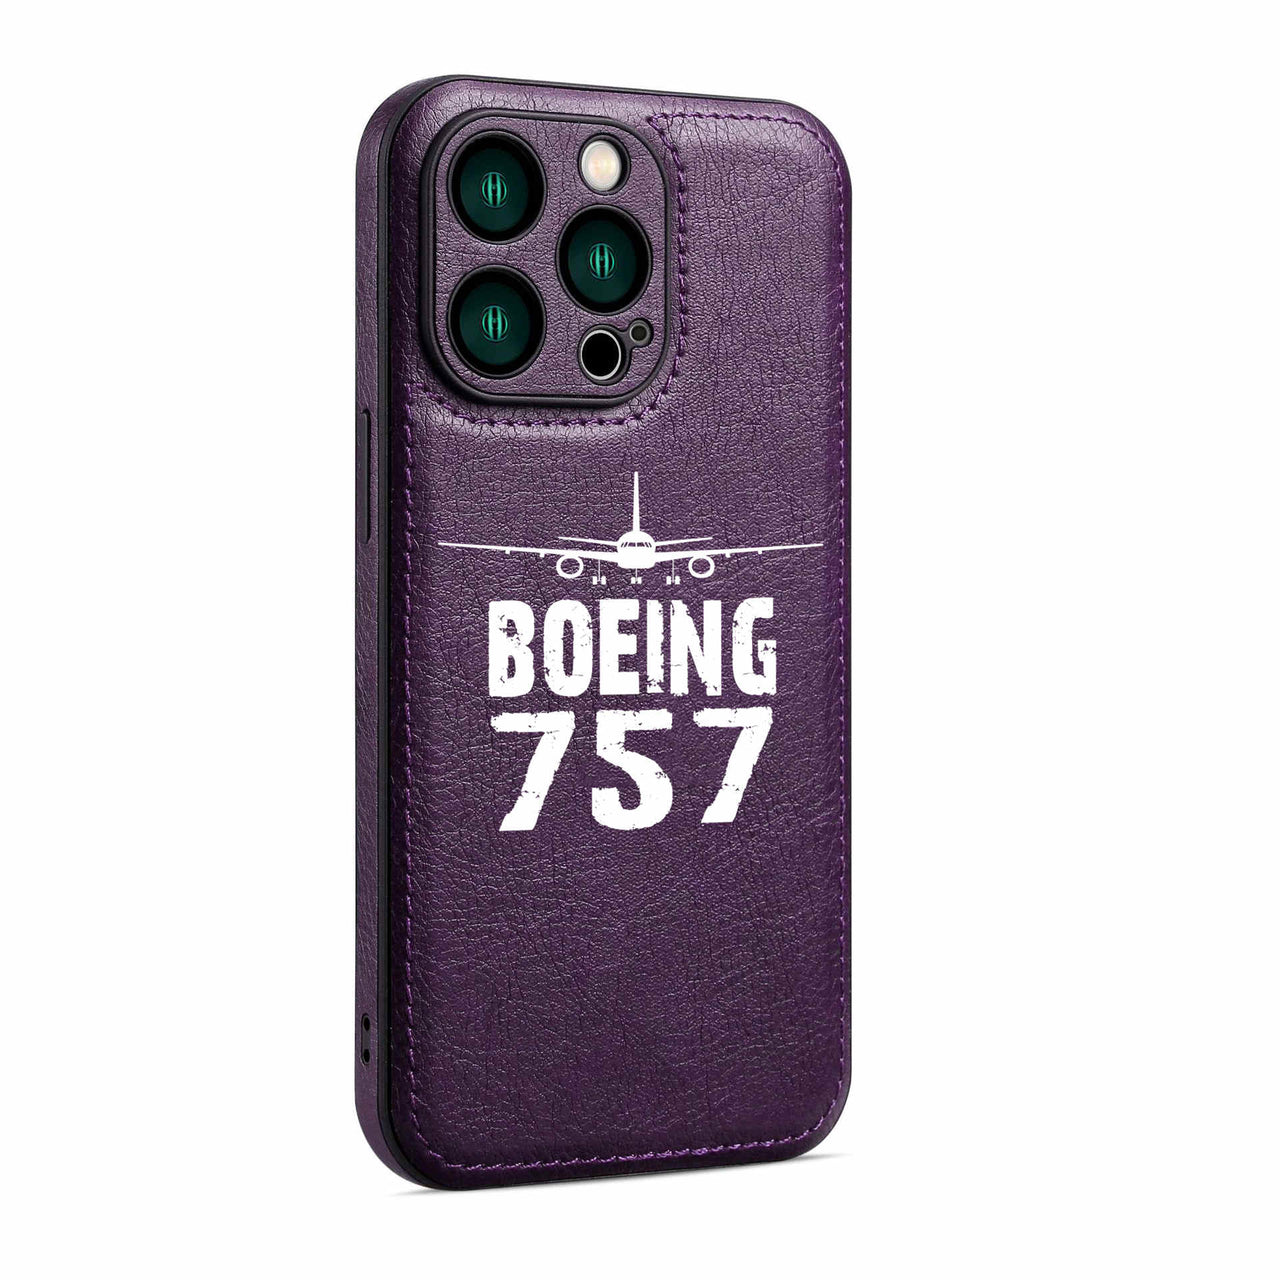 Boeing 757 & Plane Designed Leather iPhone Cases